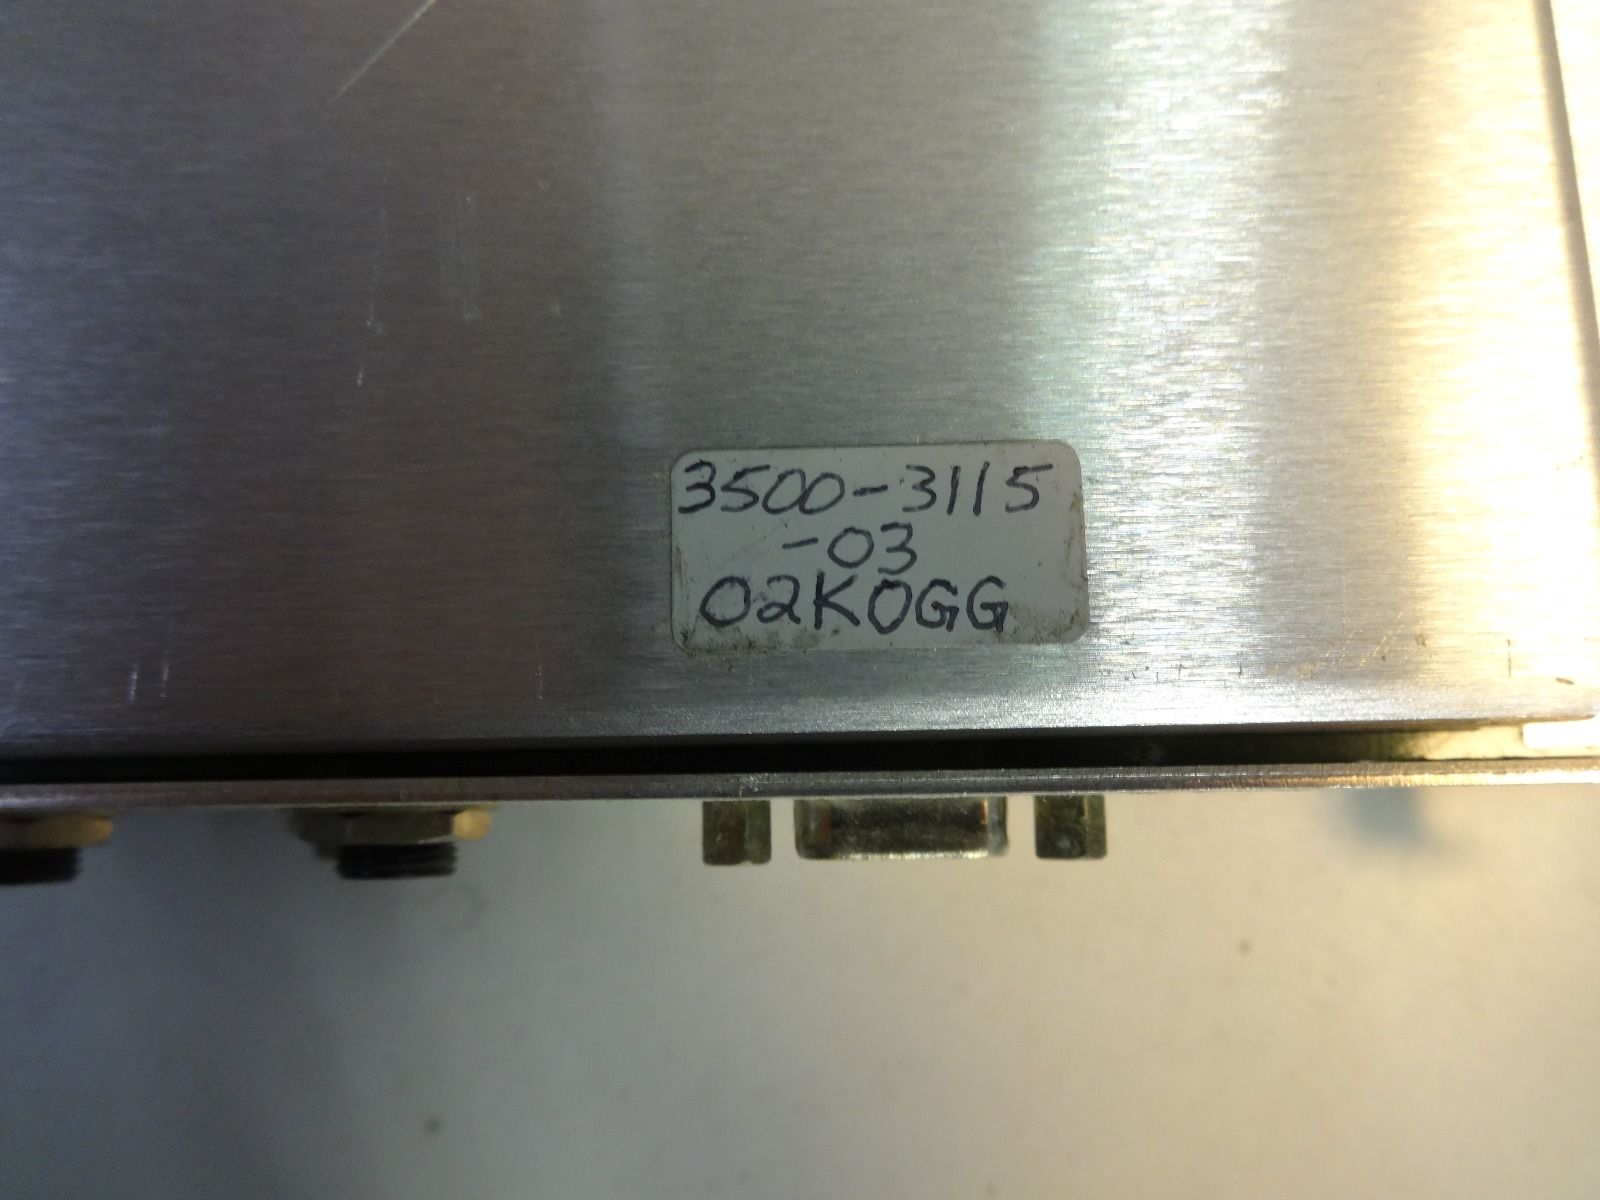 a close up of a metal object with a label on it